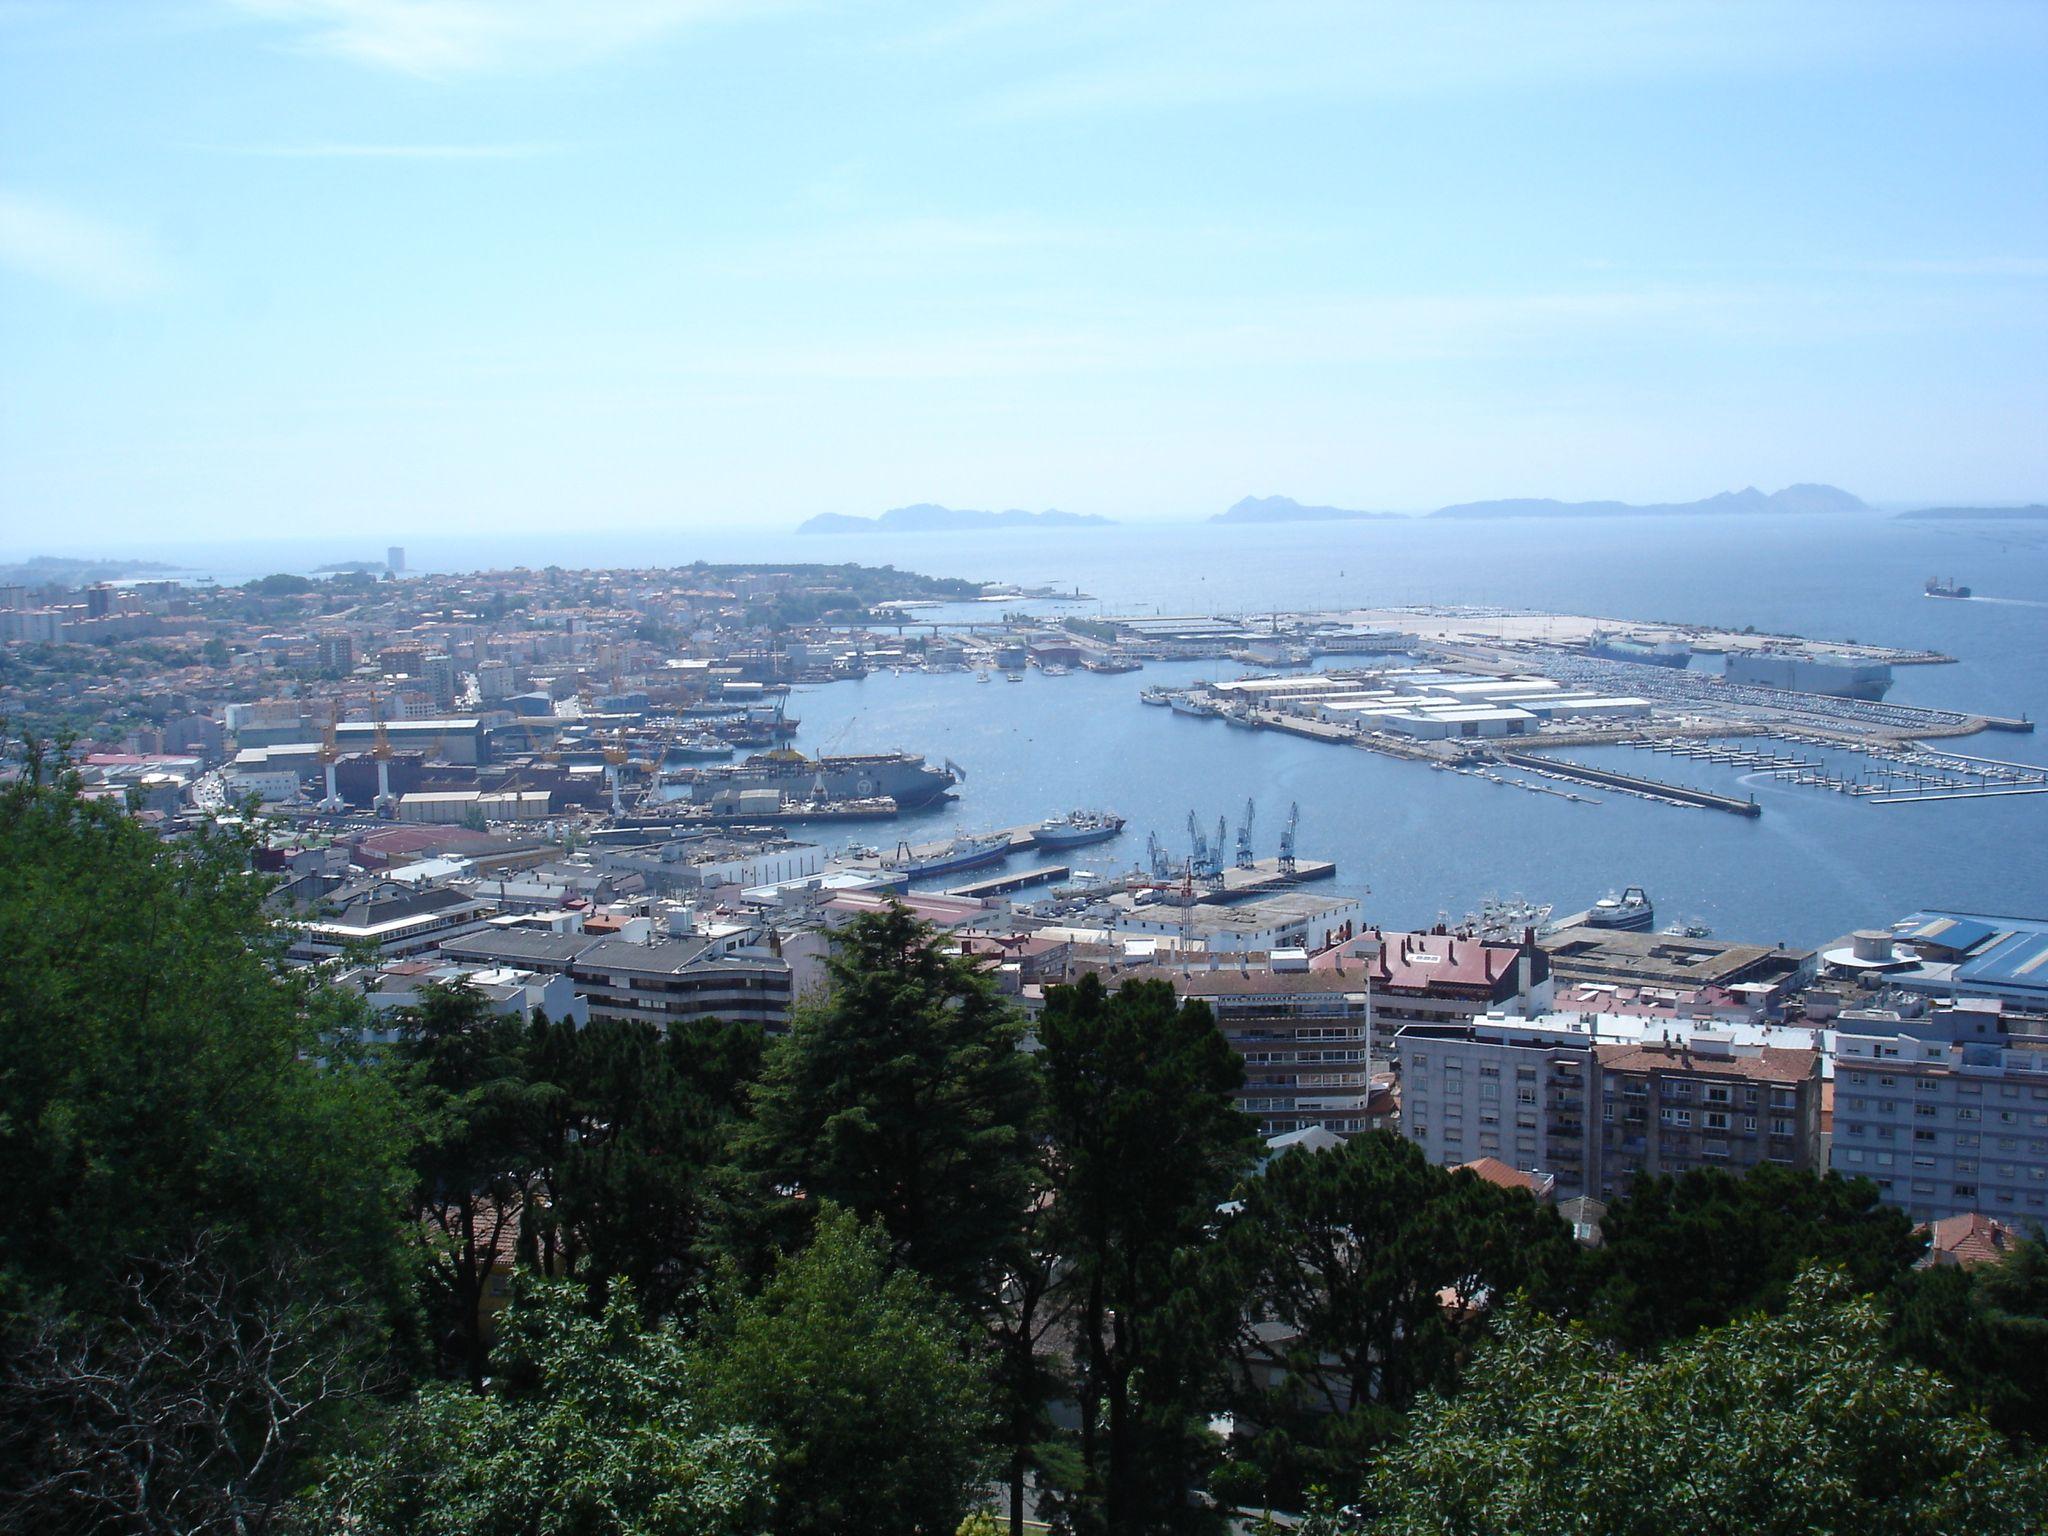 Vigo Spain Picture and videos and news